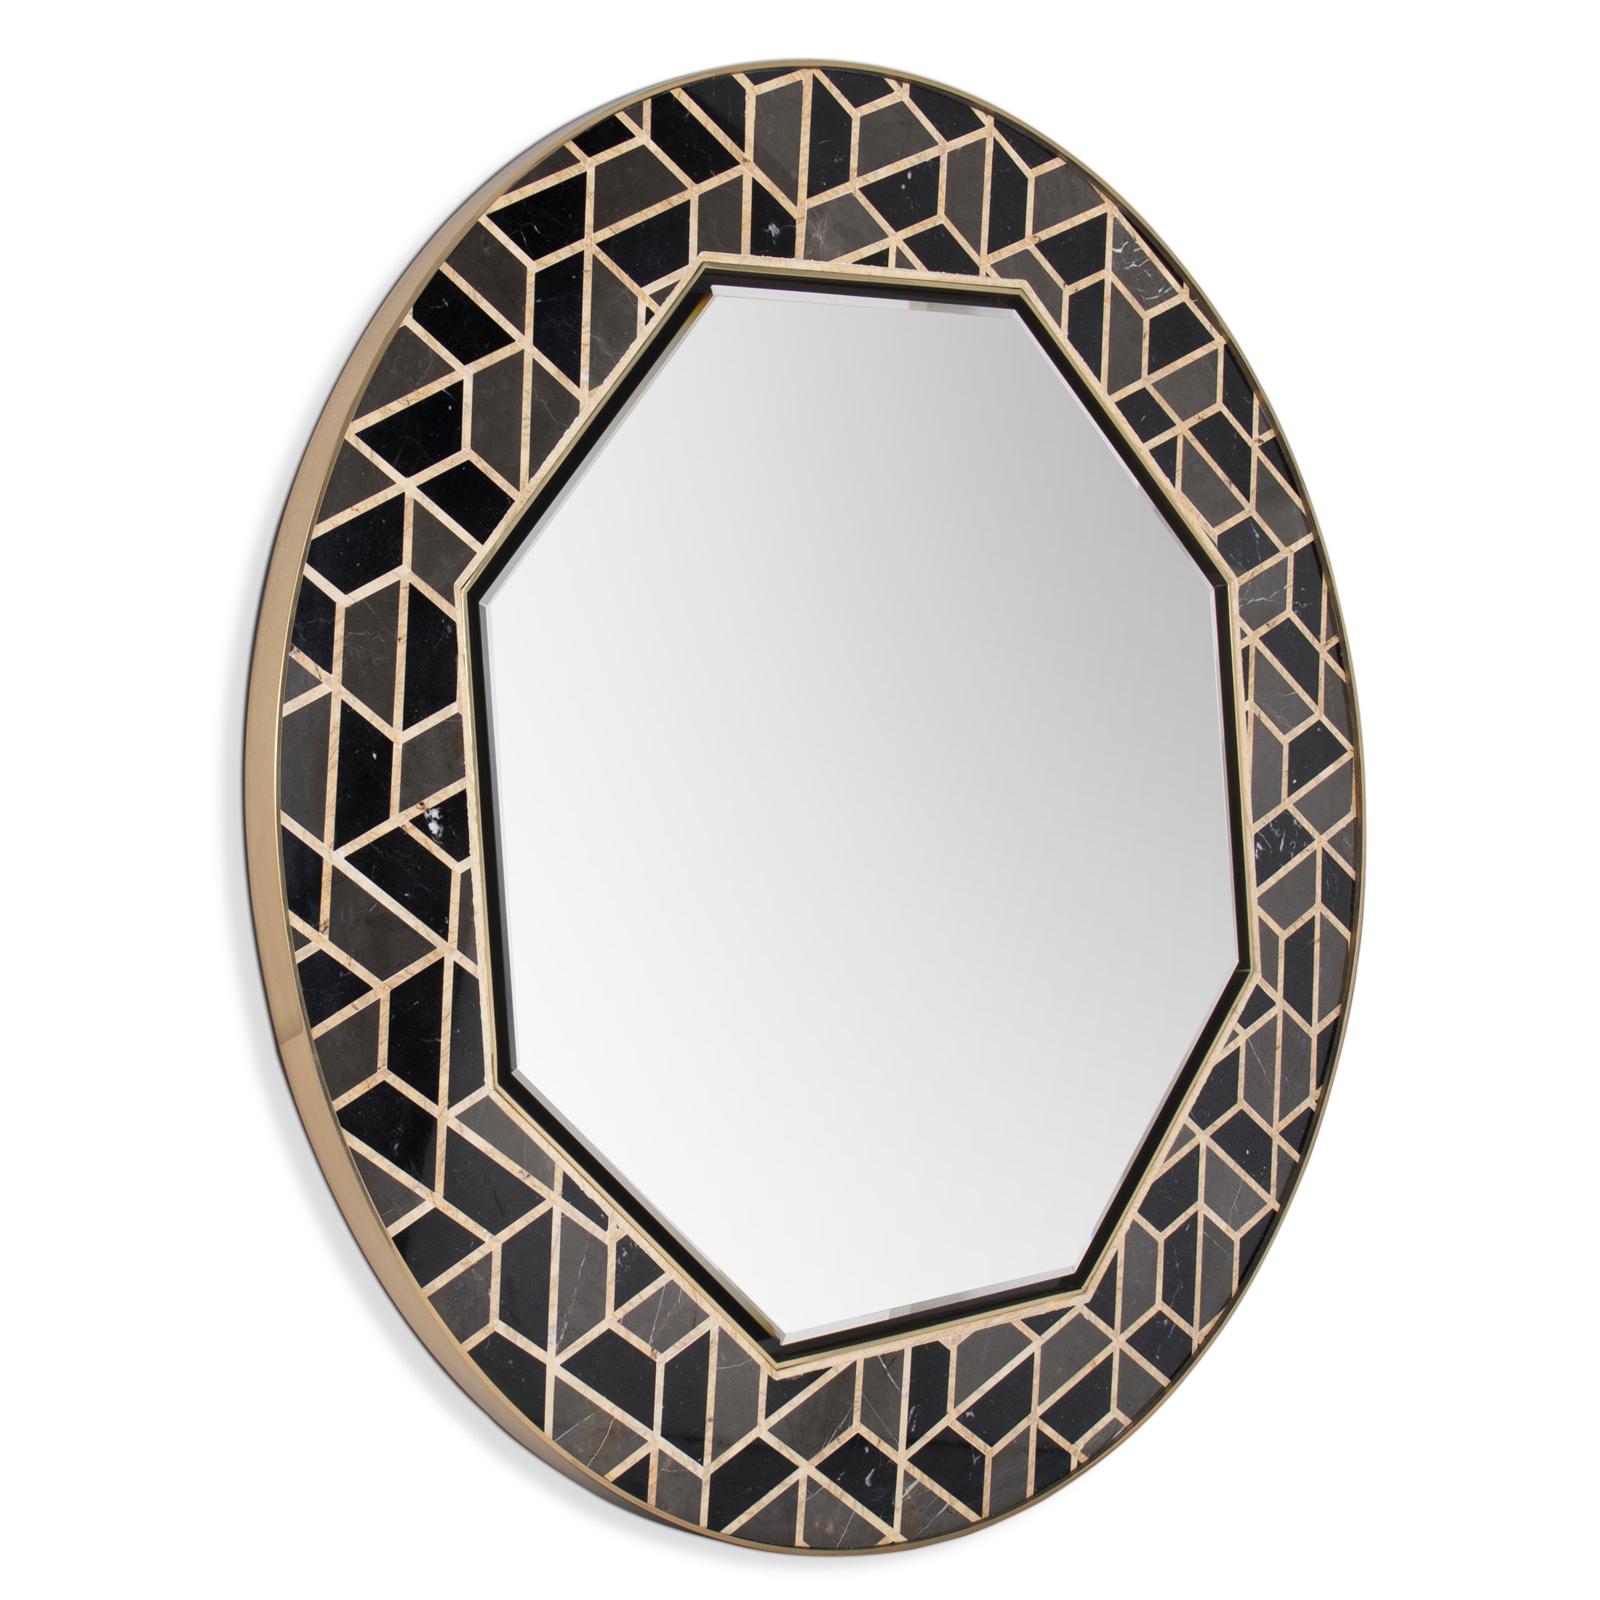 Mirror Turtle with hexagonal frame made with
High Glossy lacquered blackened solid wood,
polished brass structure and marble pieces.